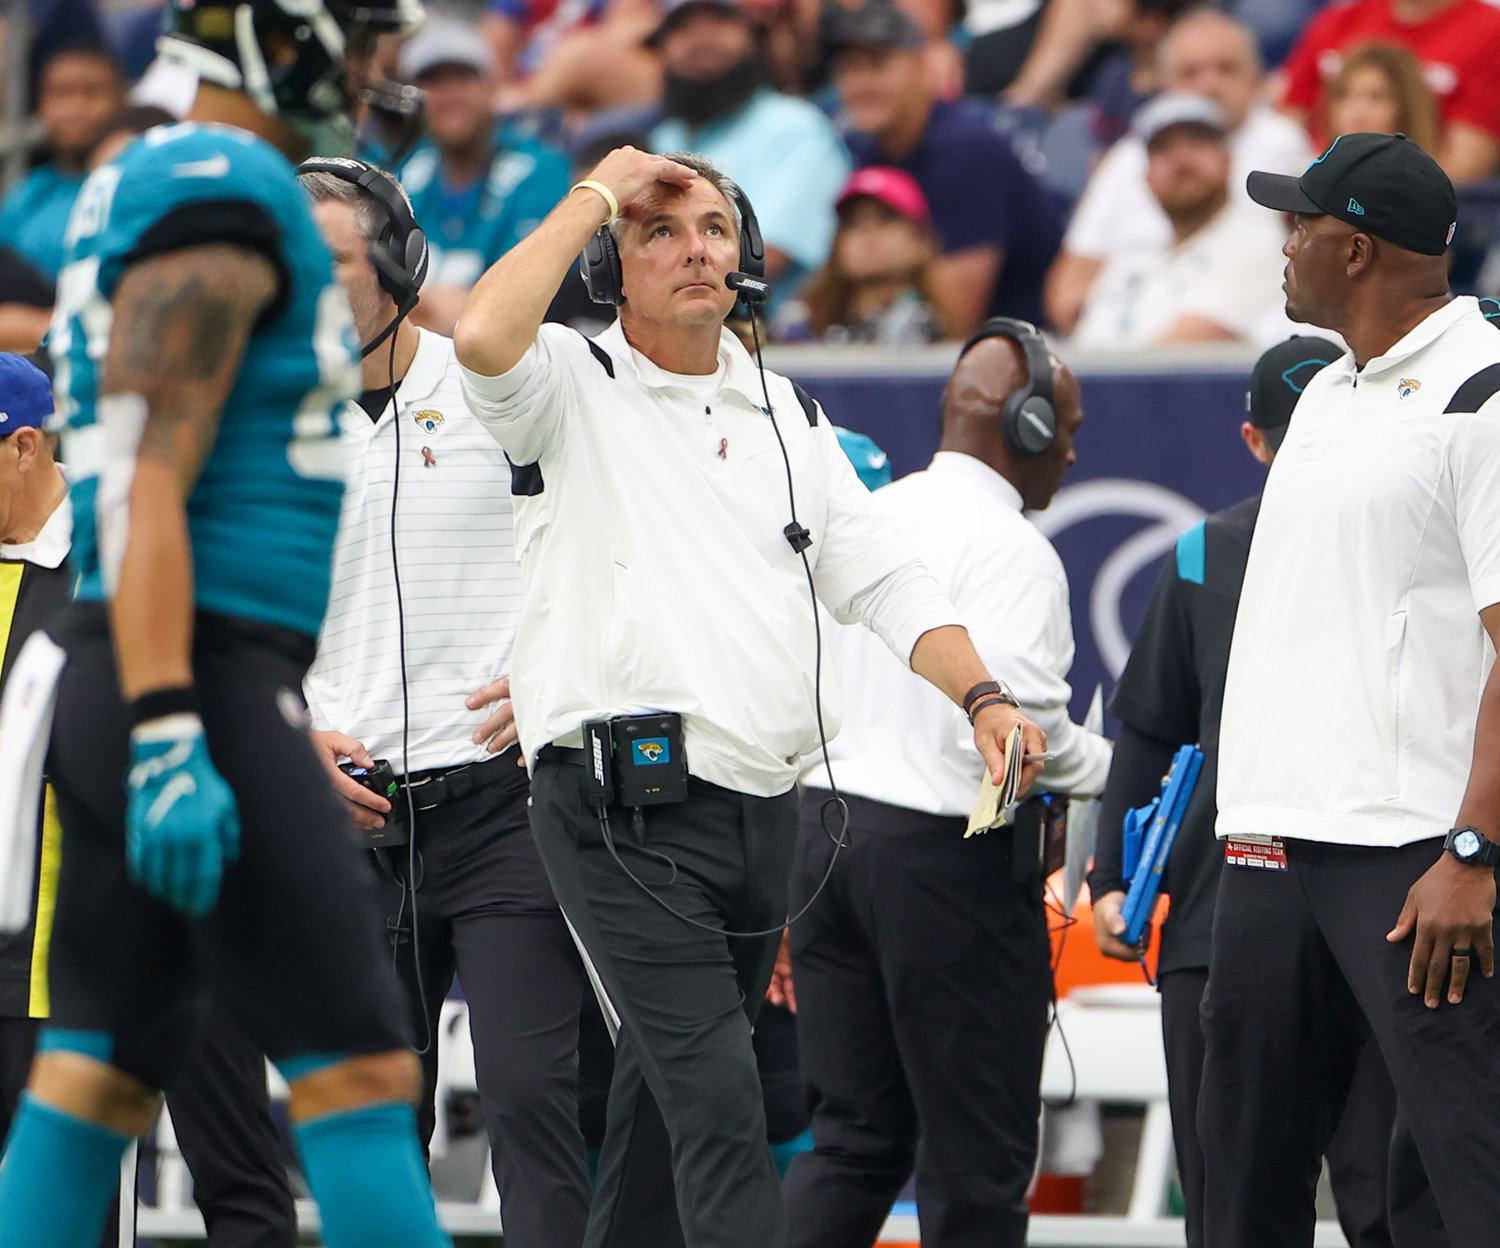 Jacksonville Jaguars head coach Urban Meyer reacts after quarterback Trevor Lawrence overthrows a receiver during the second half of an NFL game between the Houston Texans and the Jacksonville Jaguars on September 12, 2021 in Houston, Texas.